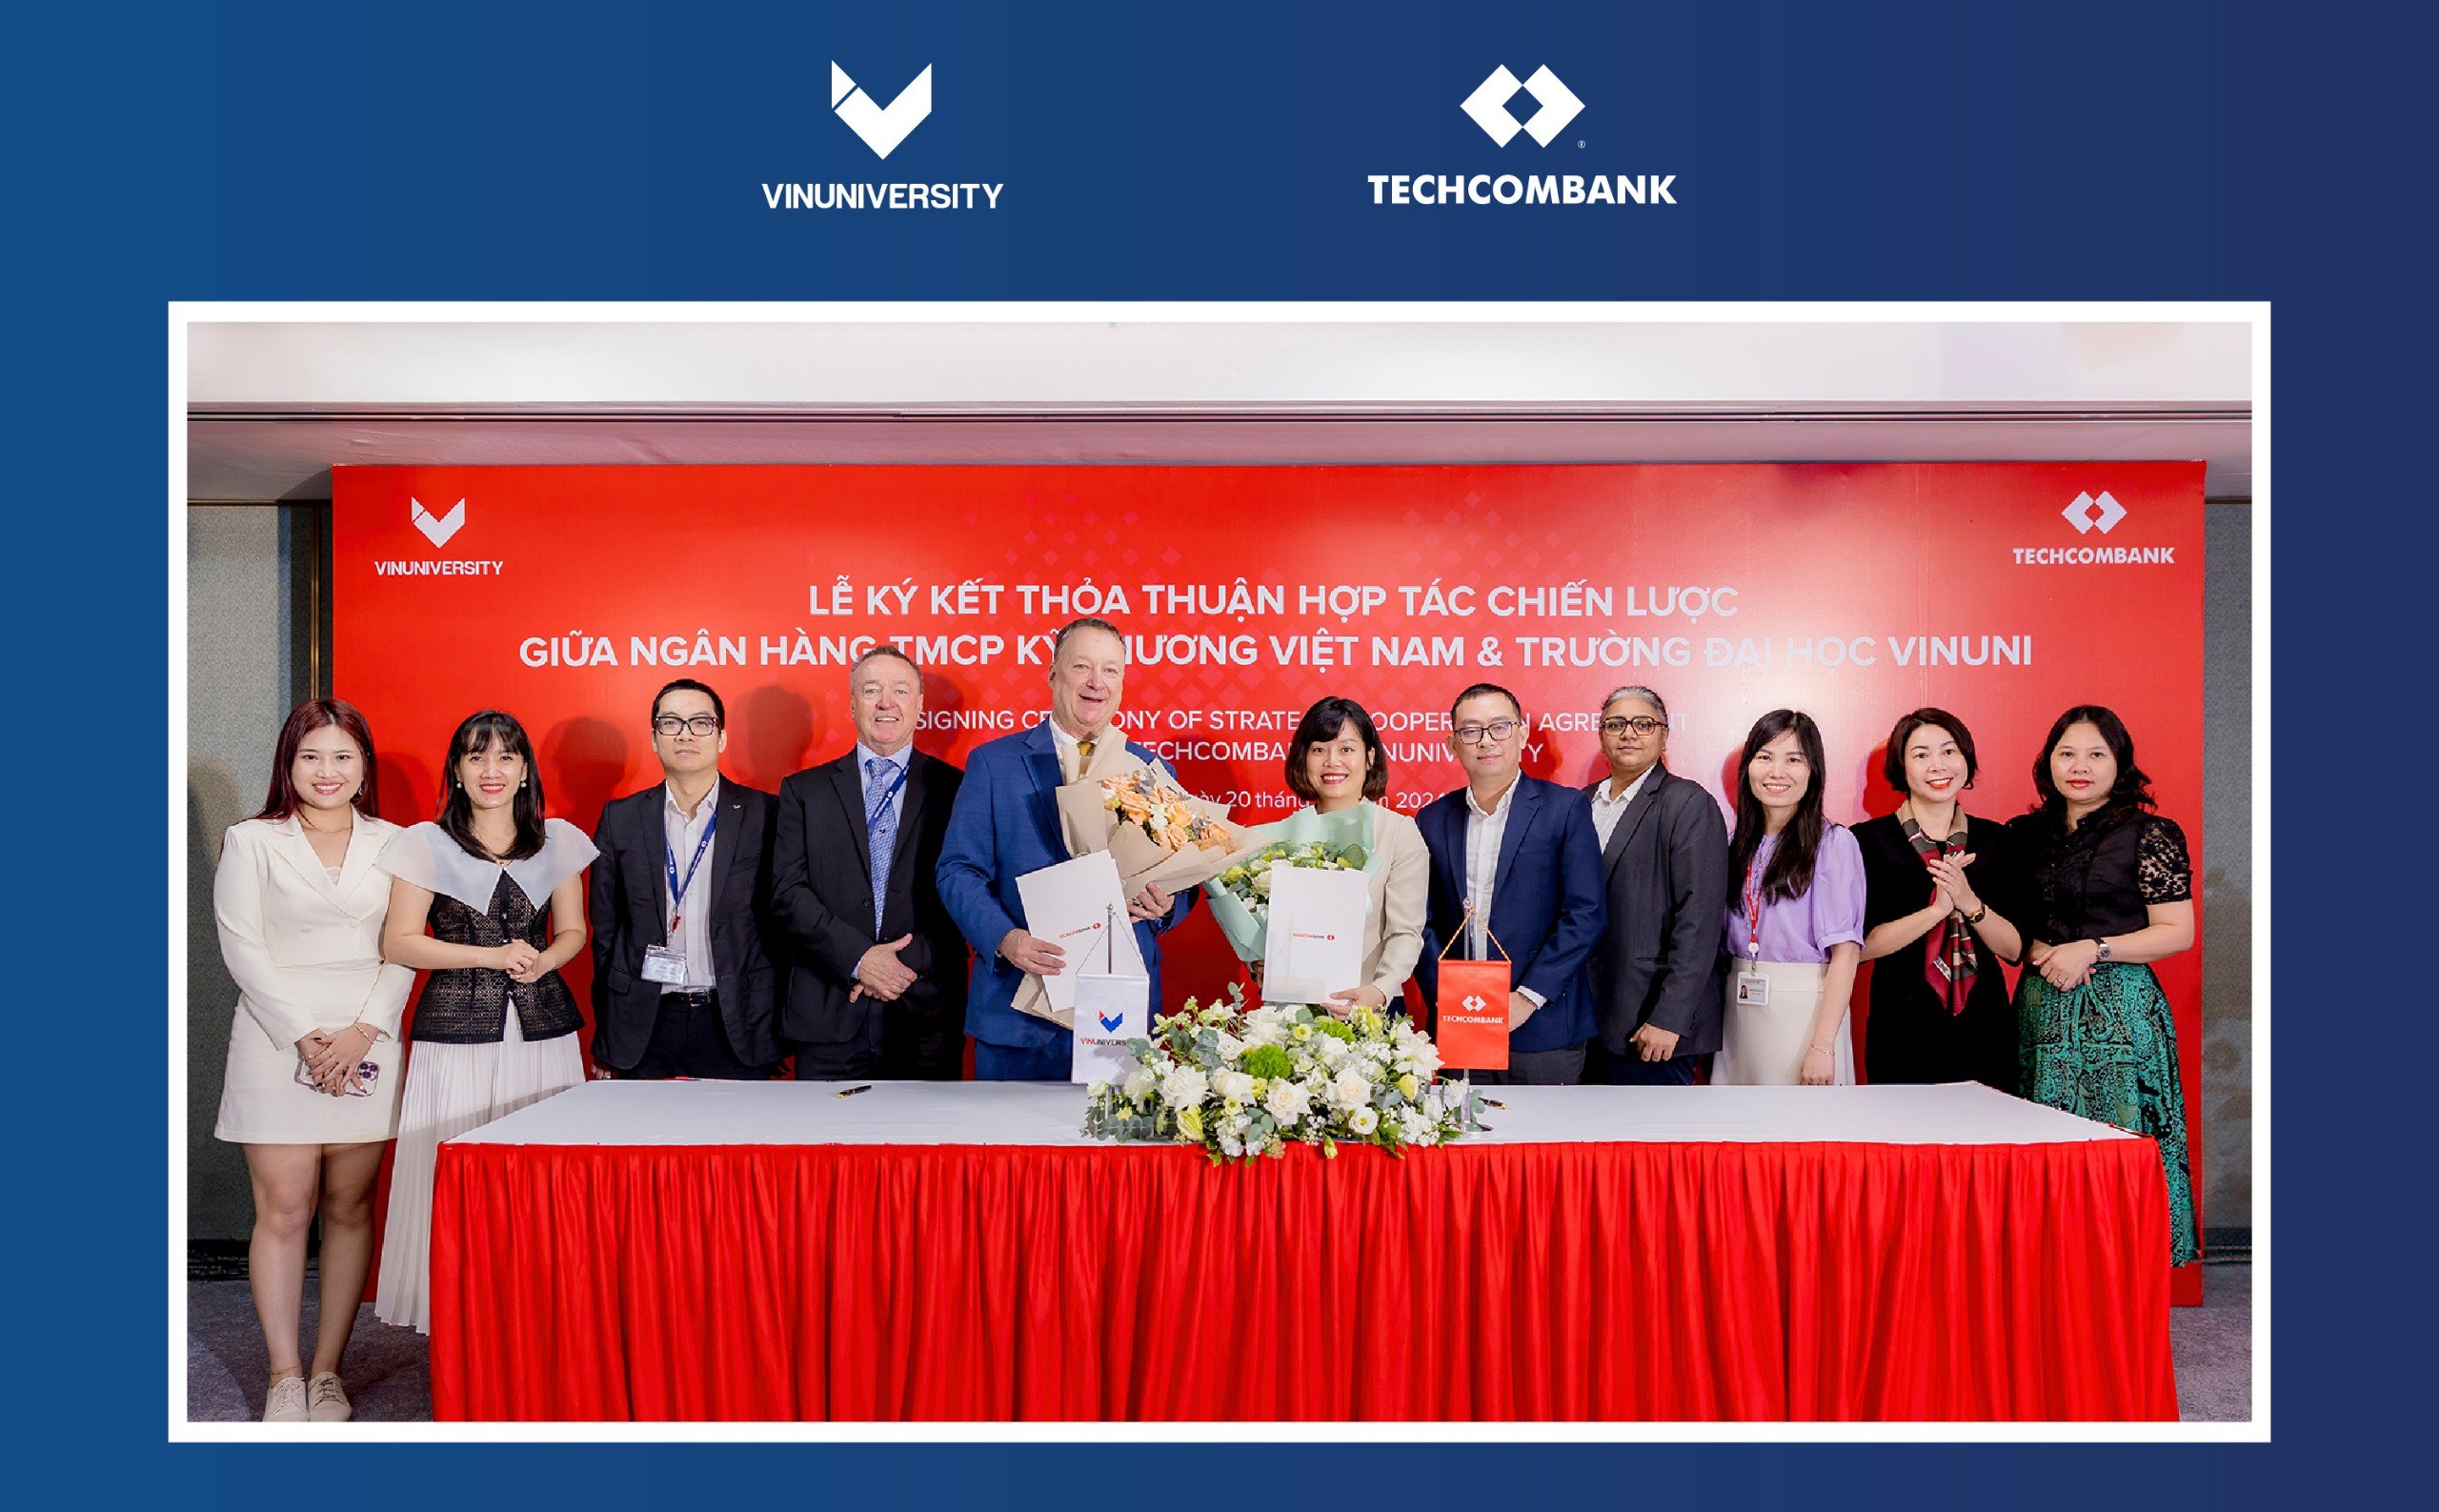 VinUni and Techcombank jointly cultivate a future generation of financially savvy leaders through strategic cooperation